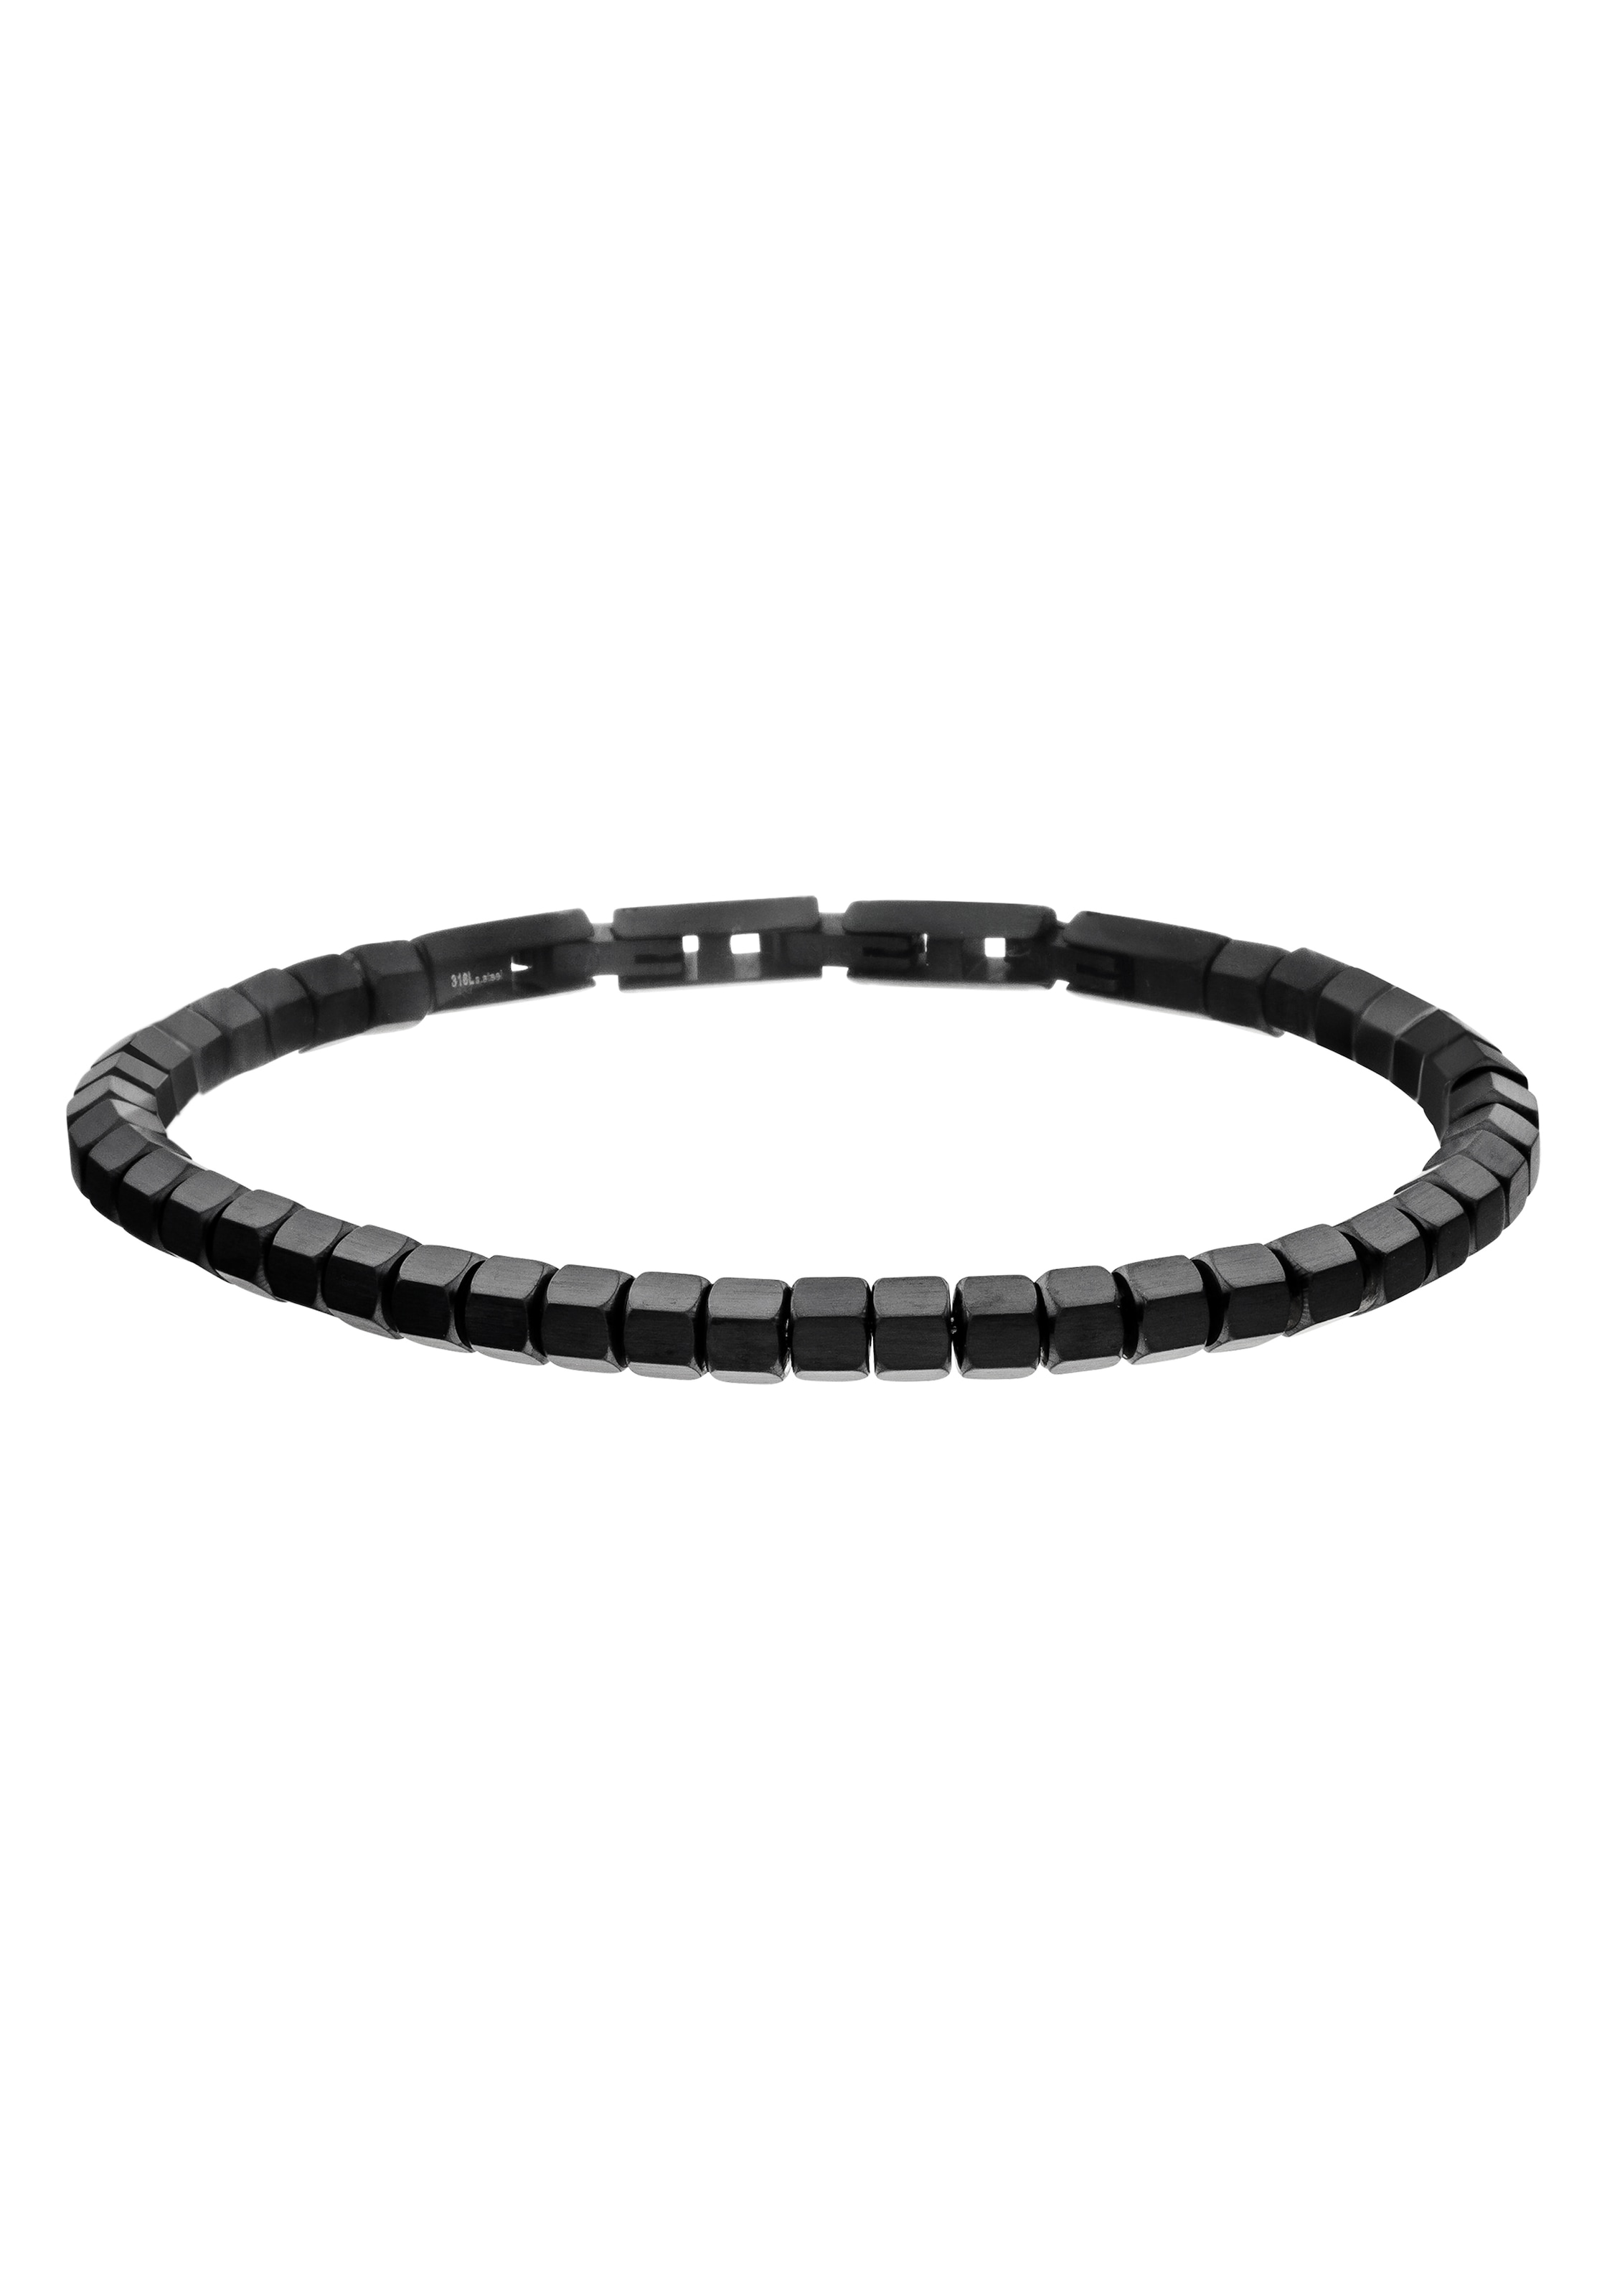 STEELWEAR Armband »Buenos Aires, SW-687« shoppen OTTO bei online SW-686